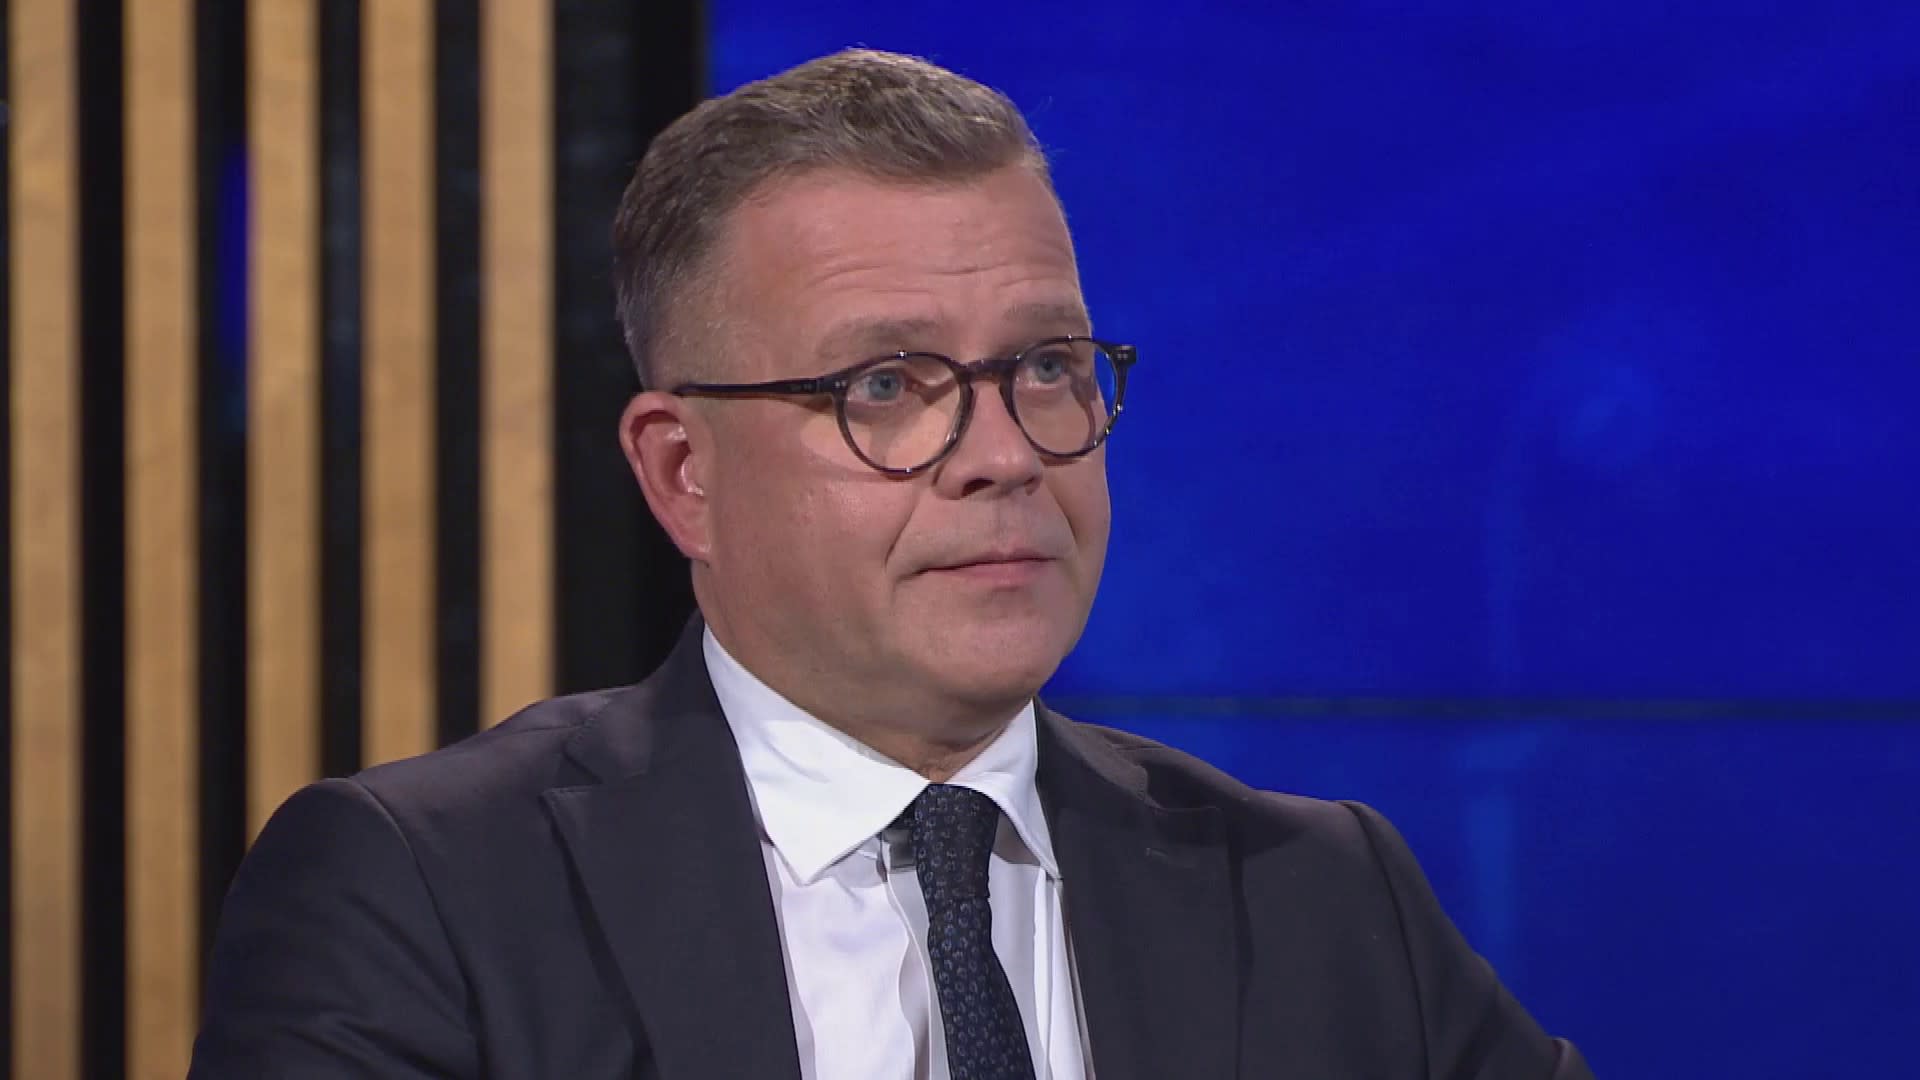 Prime Minister Orpo promises tax breaks for wage earners